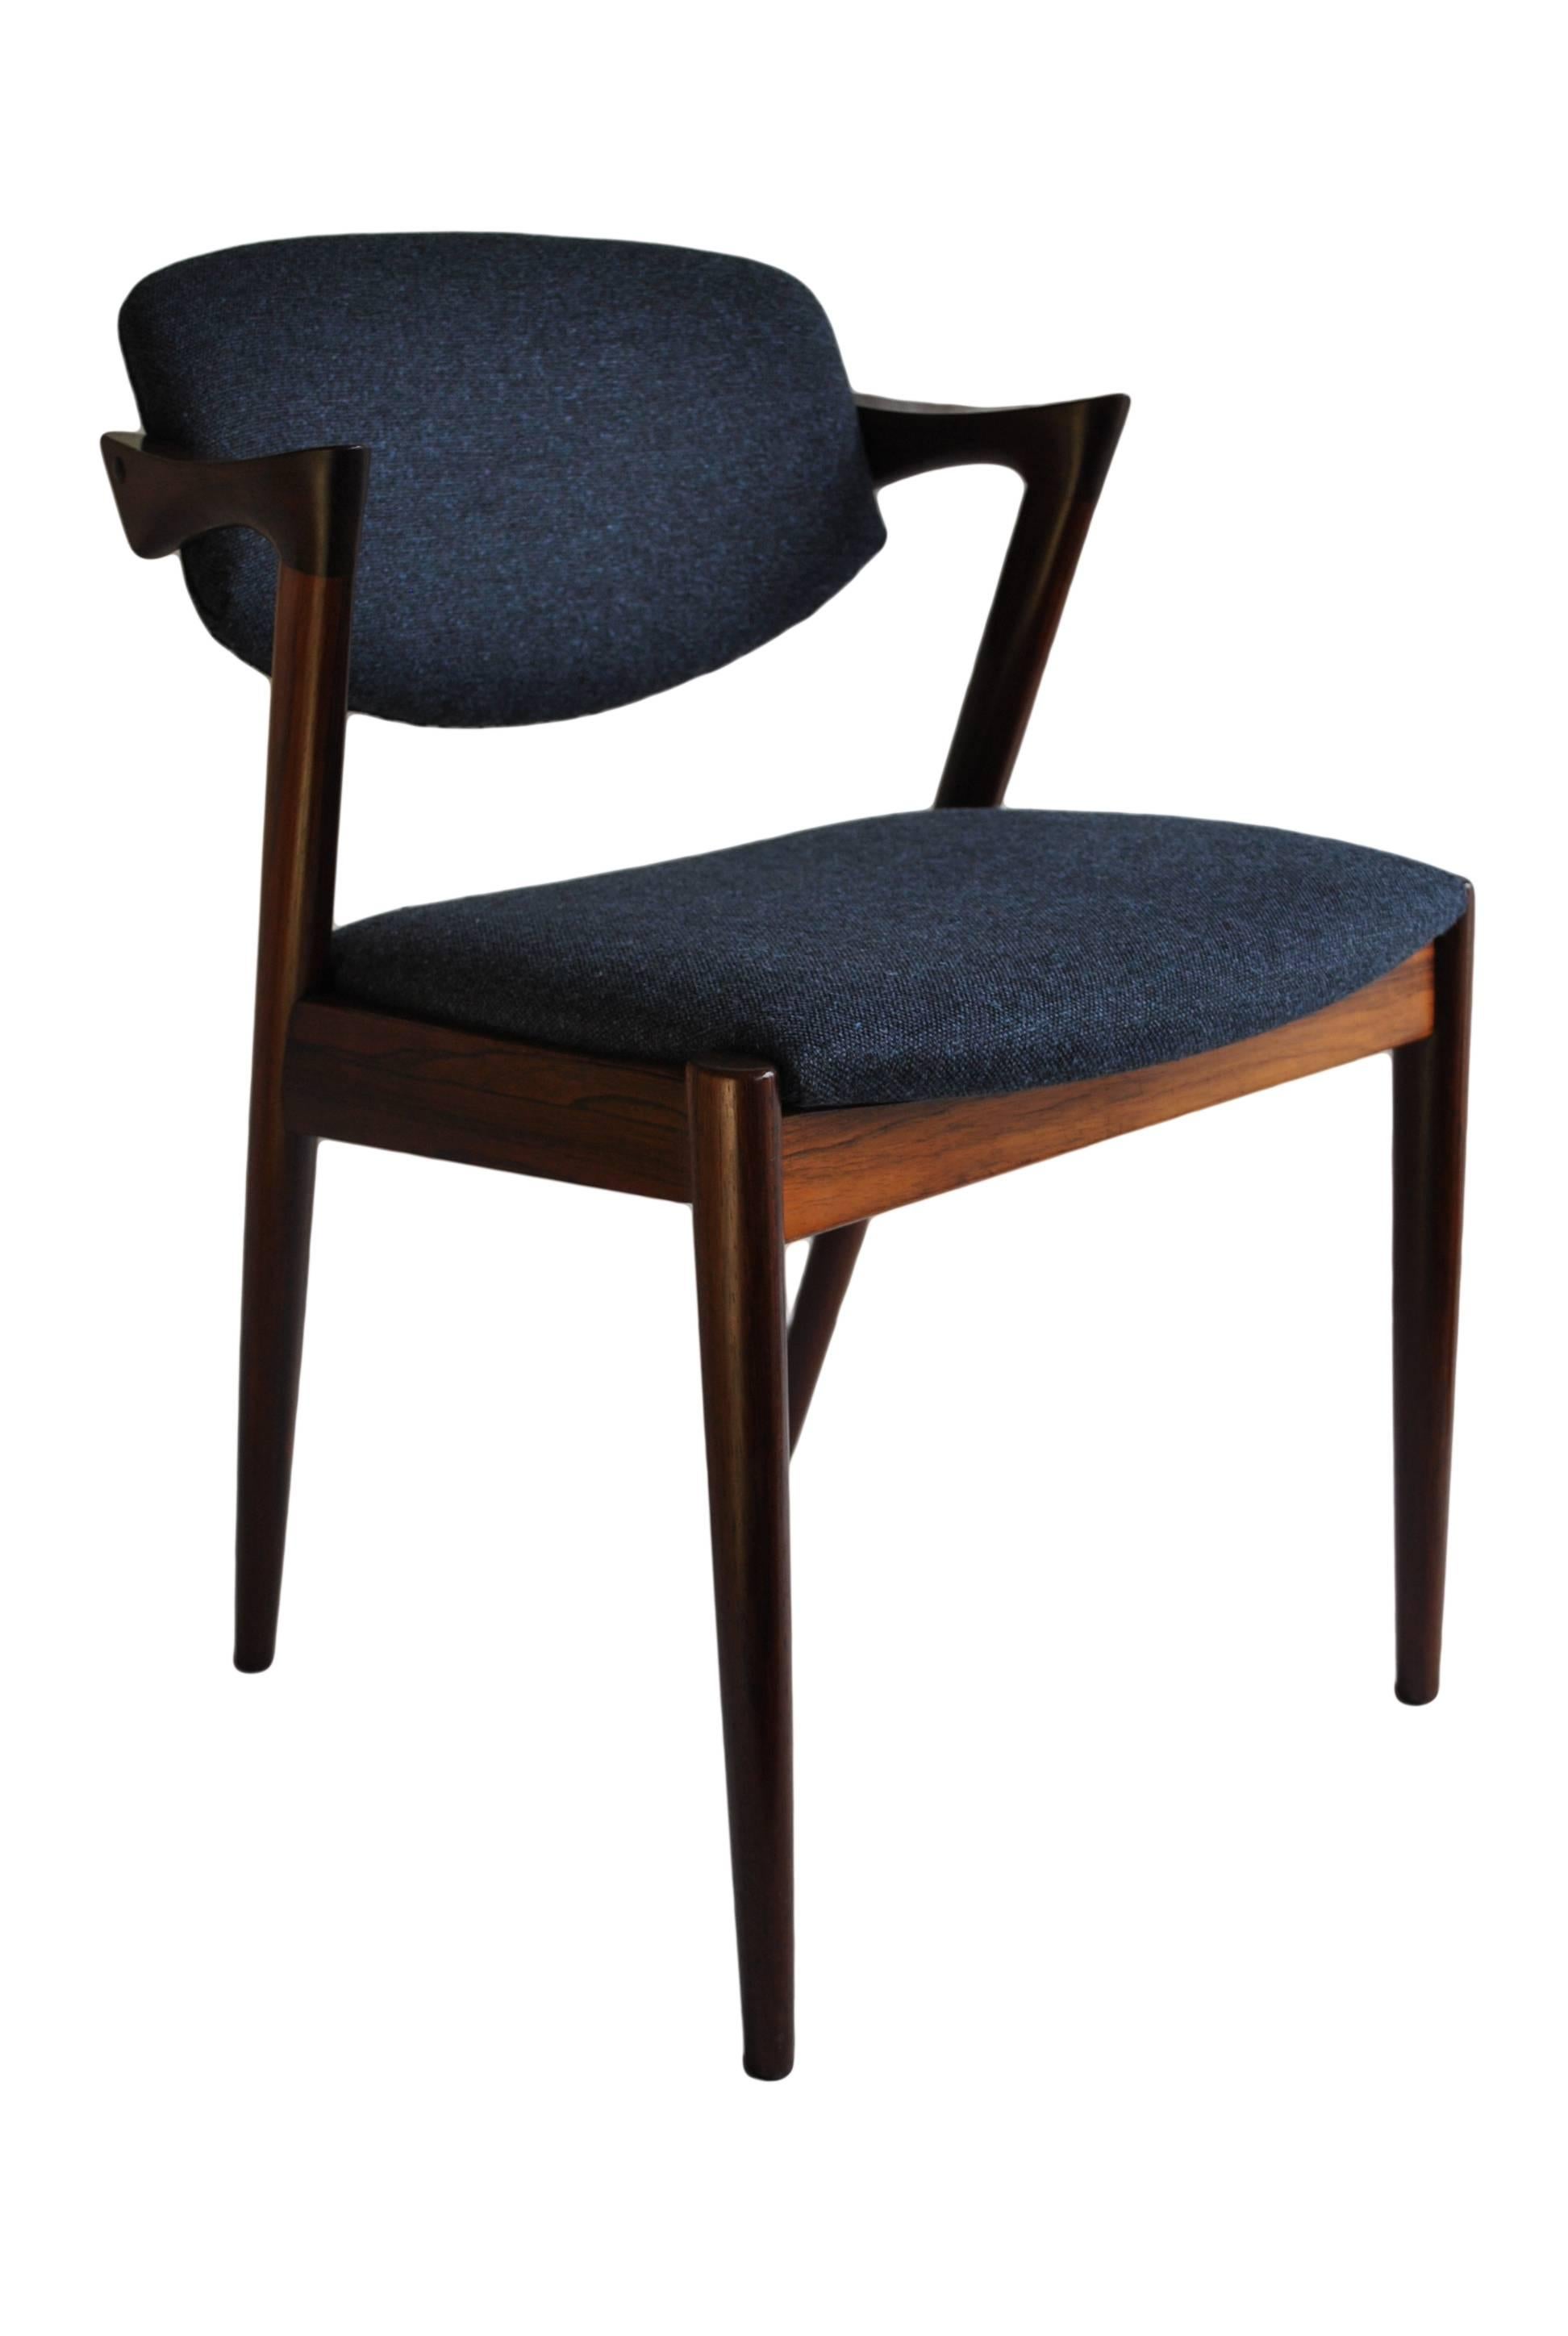 Superb set of eight fully restored original pau ferro rosewood Kai Kristiansen model 42 dining chairs - with pivot back rests.
Produced in Denmark in the 1960s. Classic elegant Mid-Century design. These have been stripped, cleaned, re-oiled and